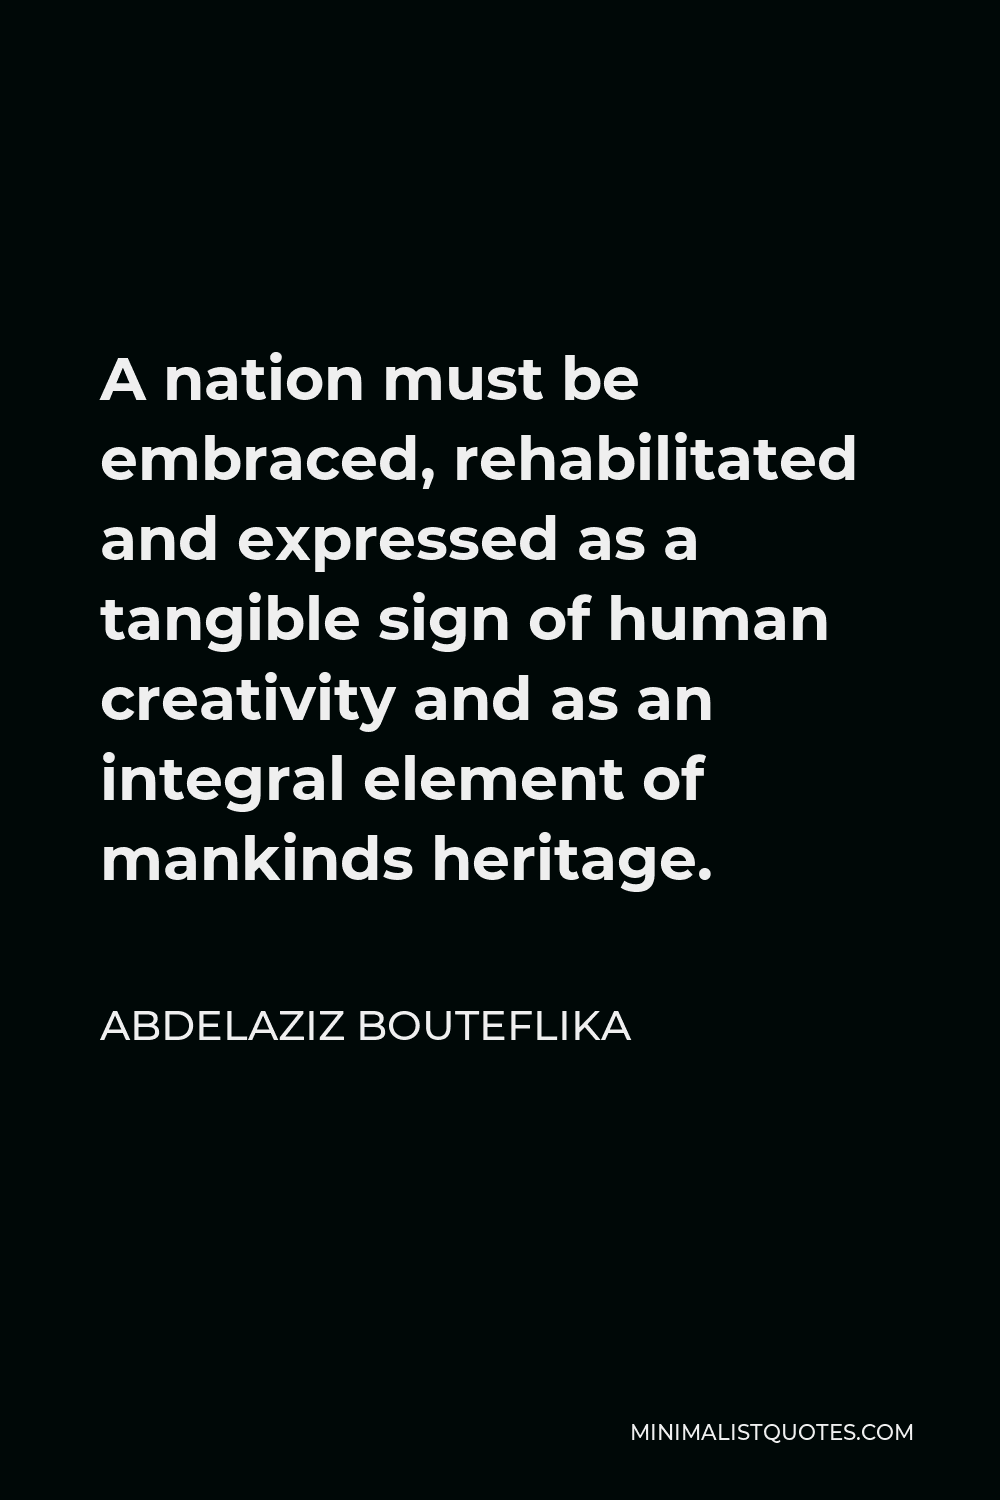 Abdelaziz Bouteflika Quote - A nation must be embraced, rehabilitated and expressed as a tangible sign of human creativity and as an integral element of mankinds heritage.